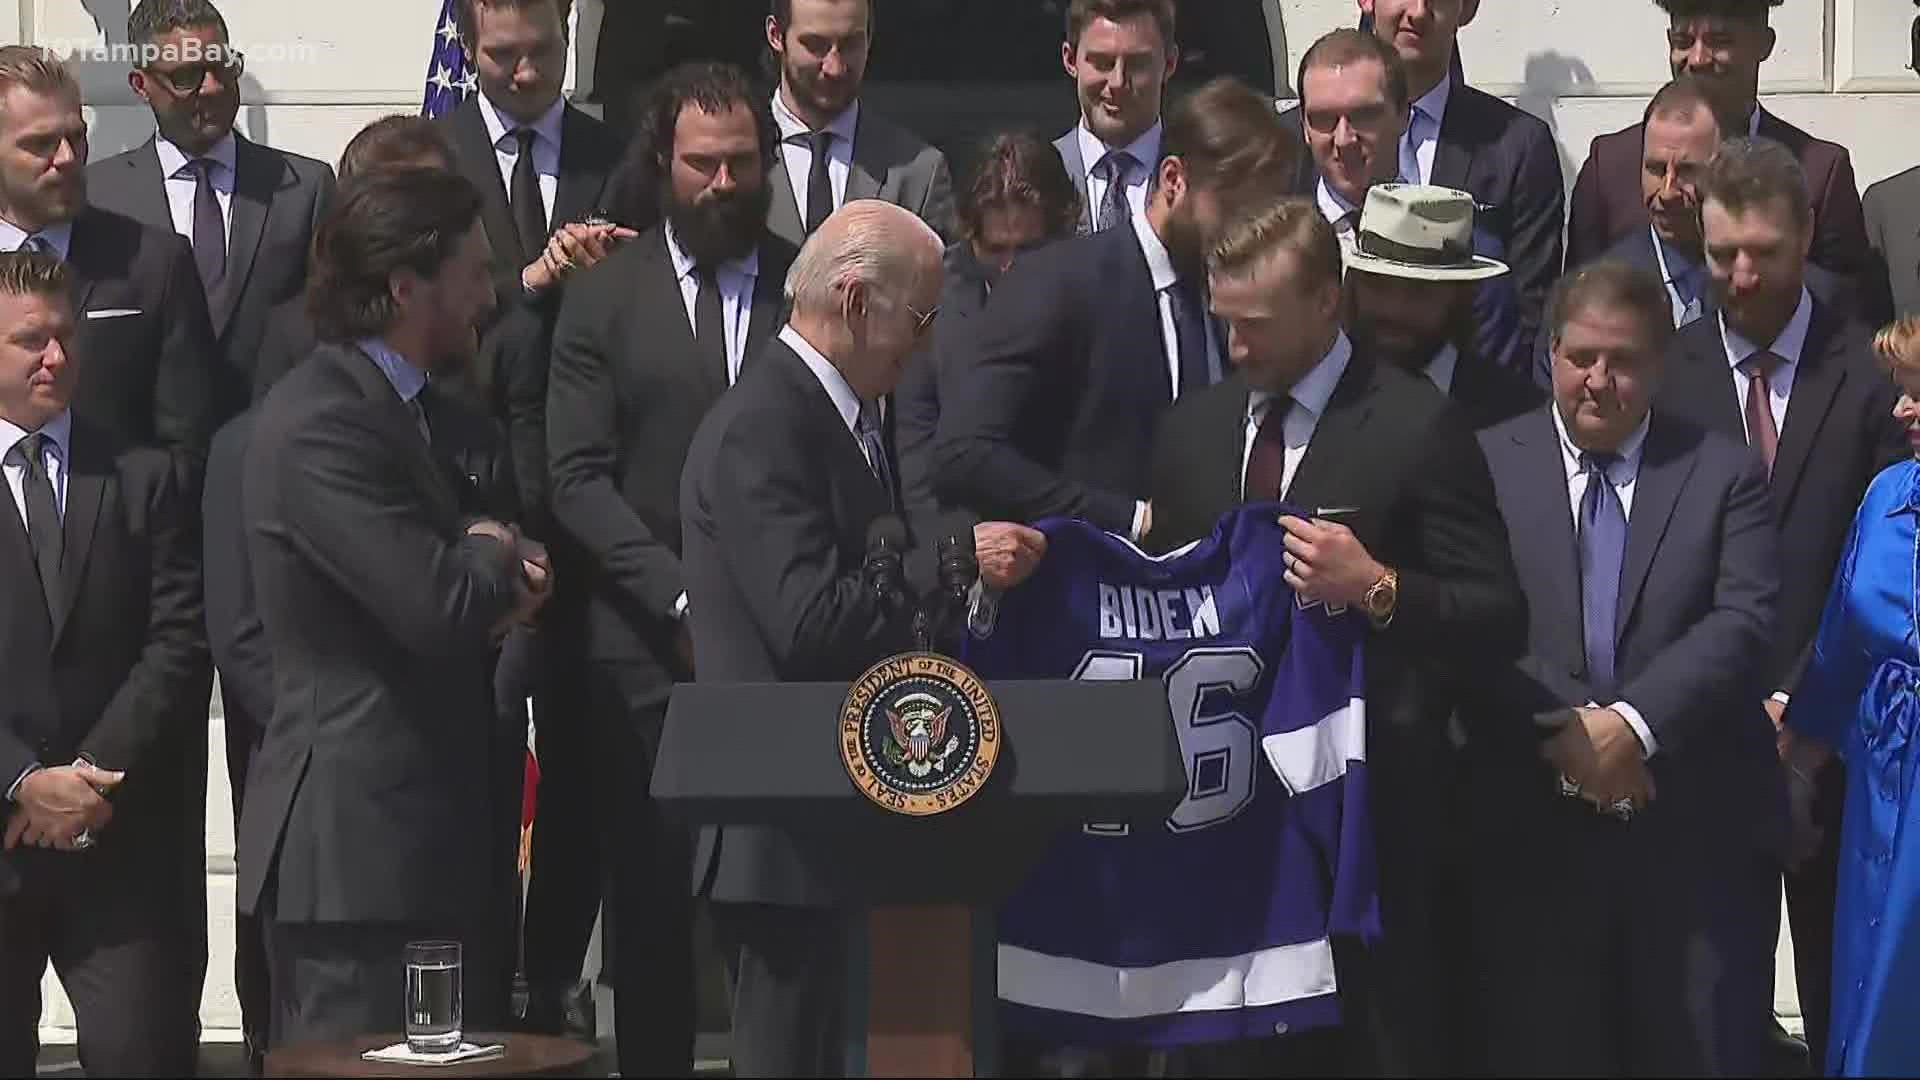 President Joe Biden honored the team Monday during a ceremony full of laughter and memories.